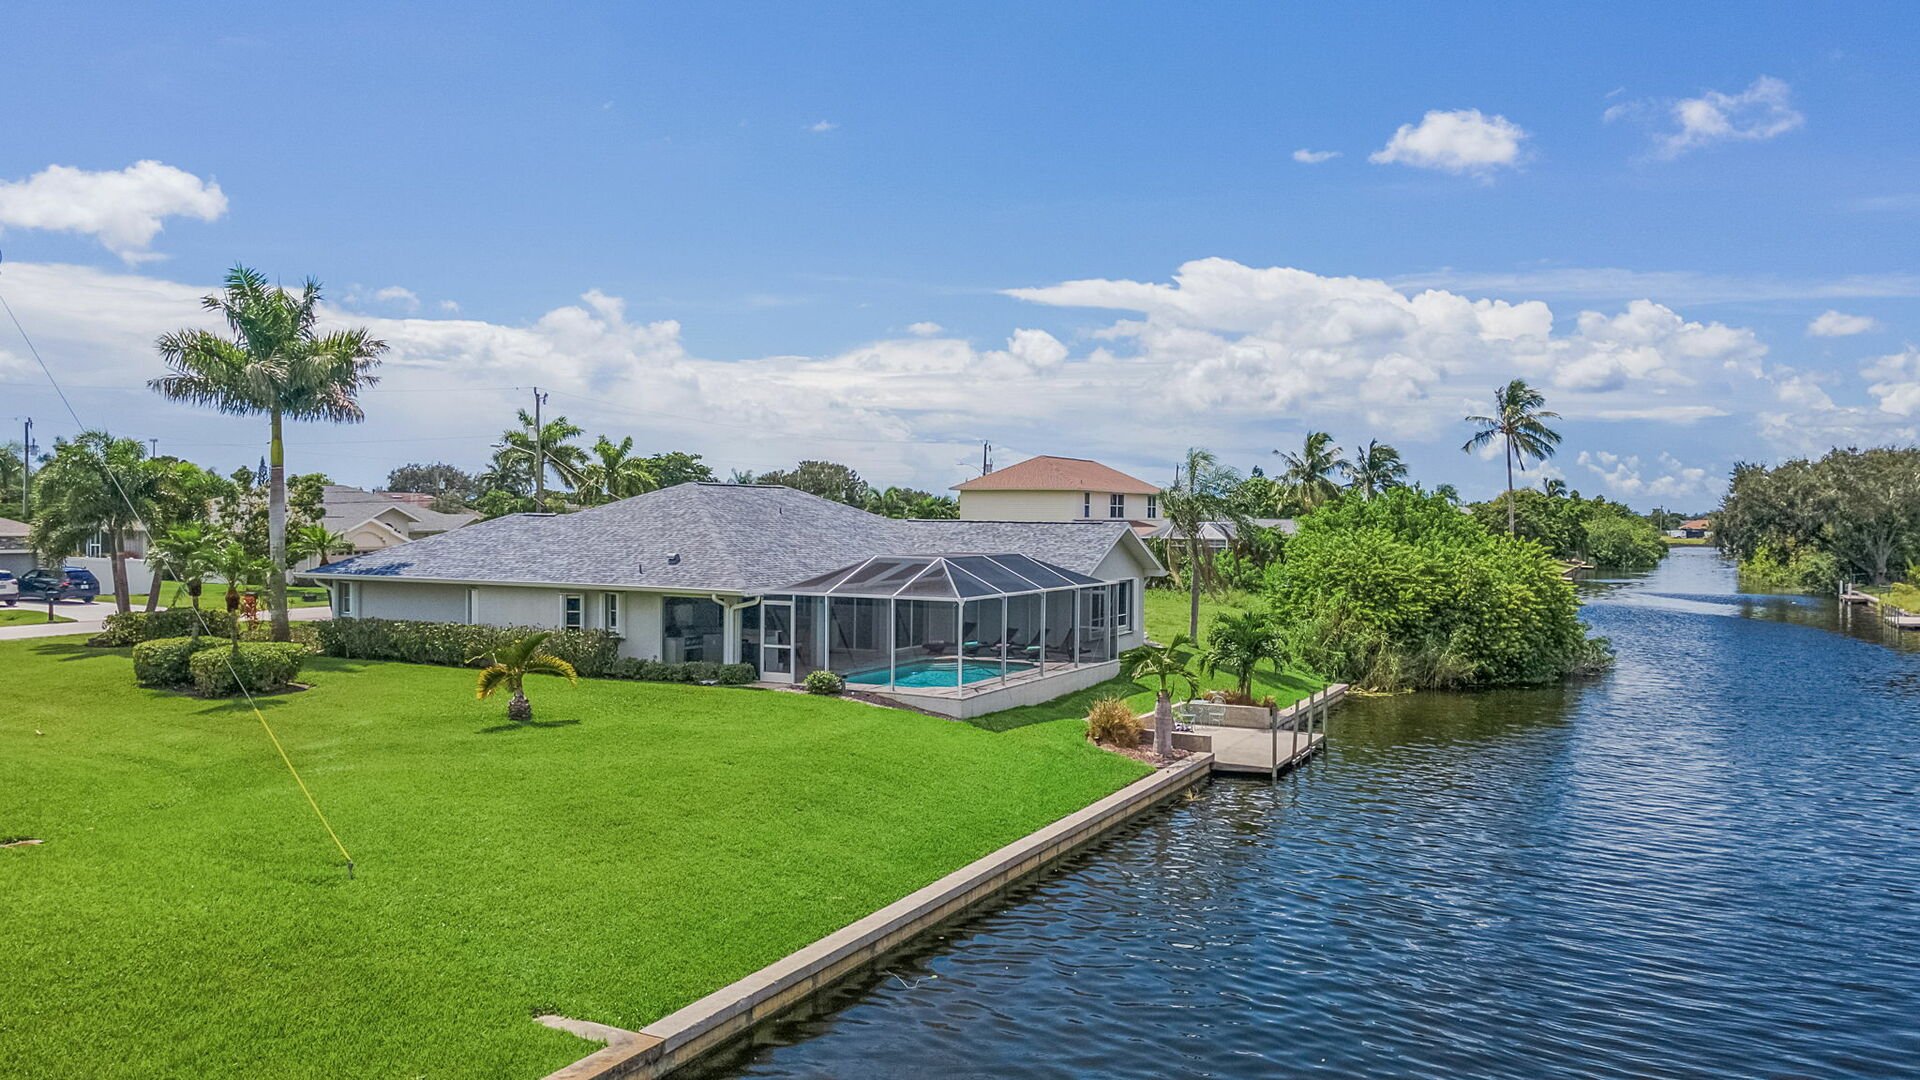 3 bedroom vacation rental on the water